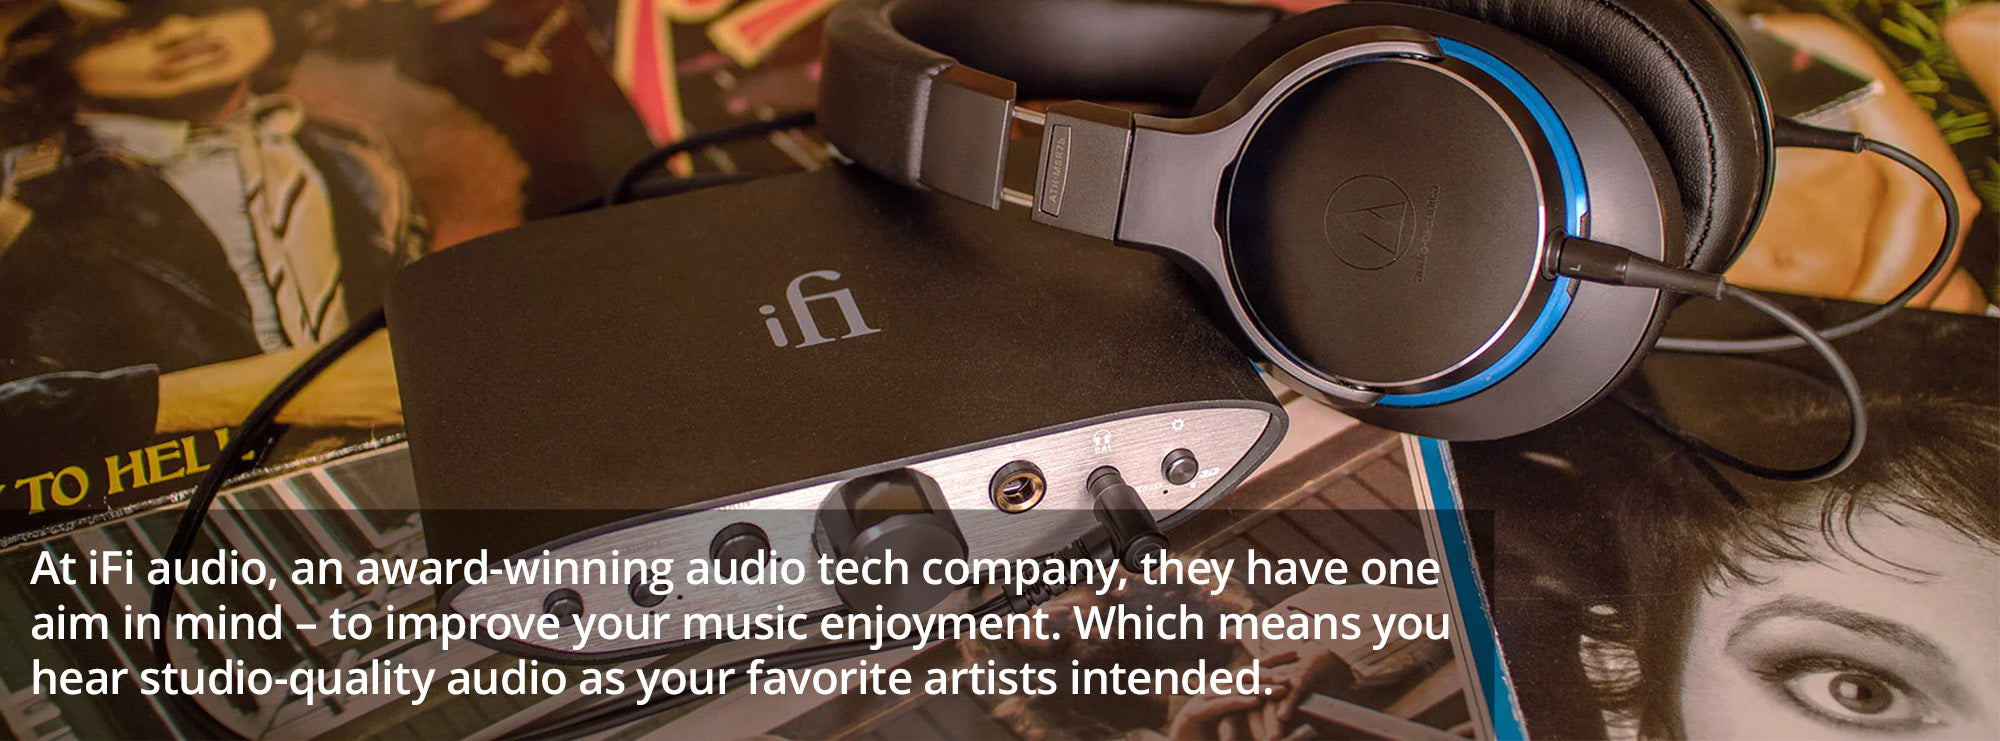 At iFi audio, an award-winning audio tech company, they have one aim in mind – to improve your music enjoyment. Which means you hear studio-quality audio as your favorite artists intended.